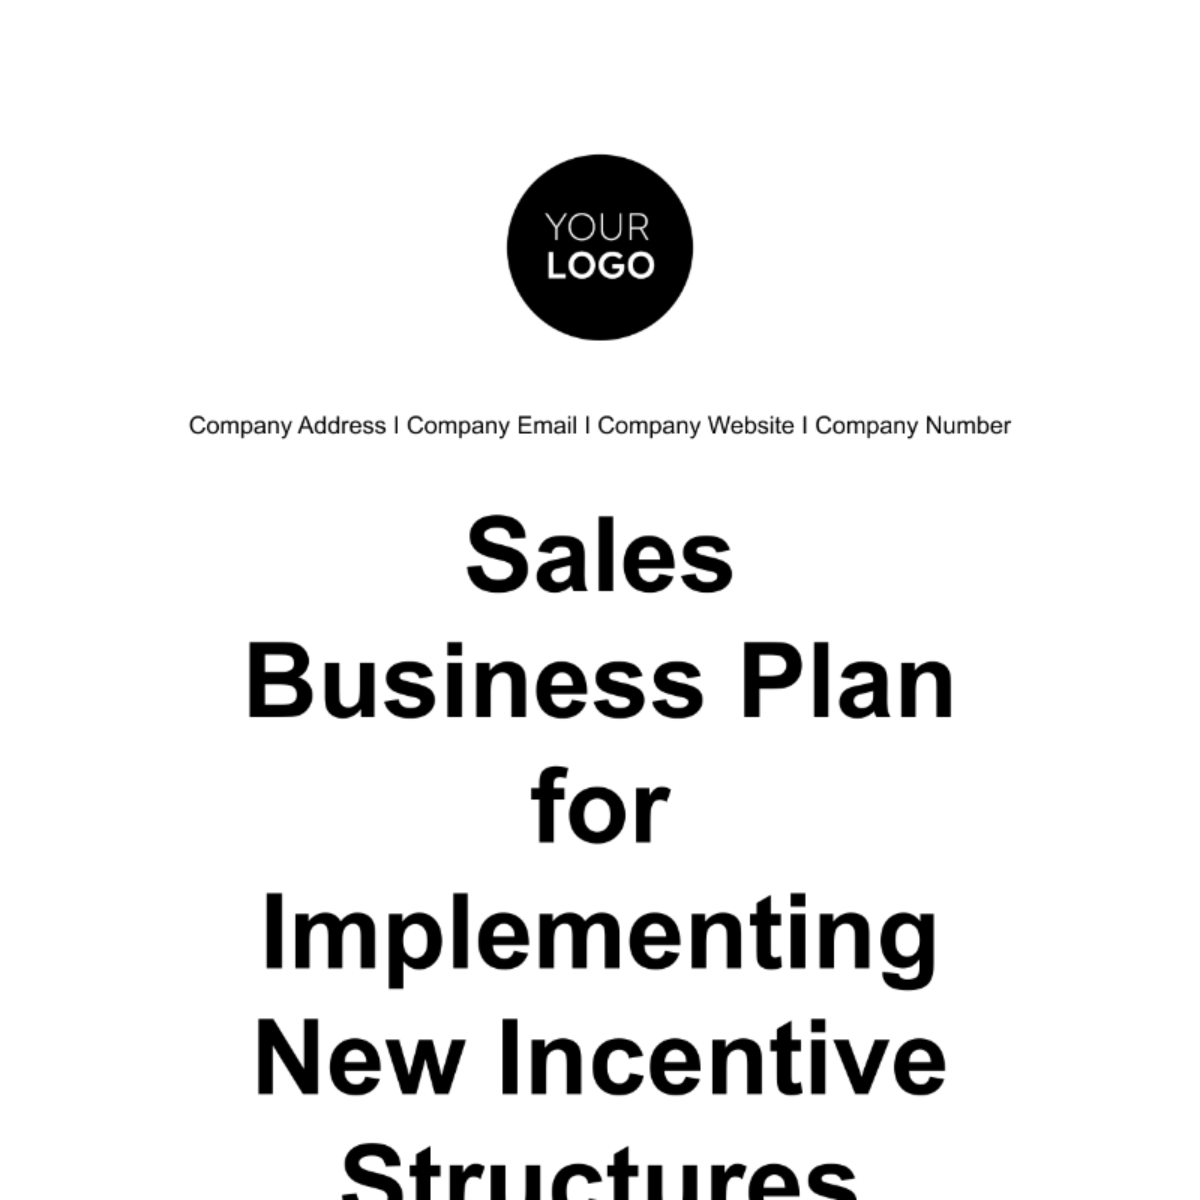 Free Sales Business Plan for Implementing New Incentive Structures Template